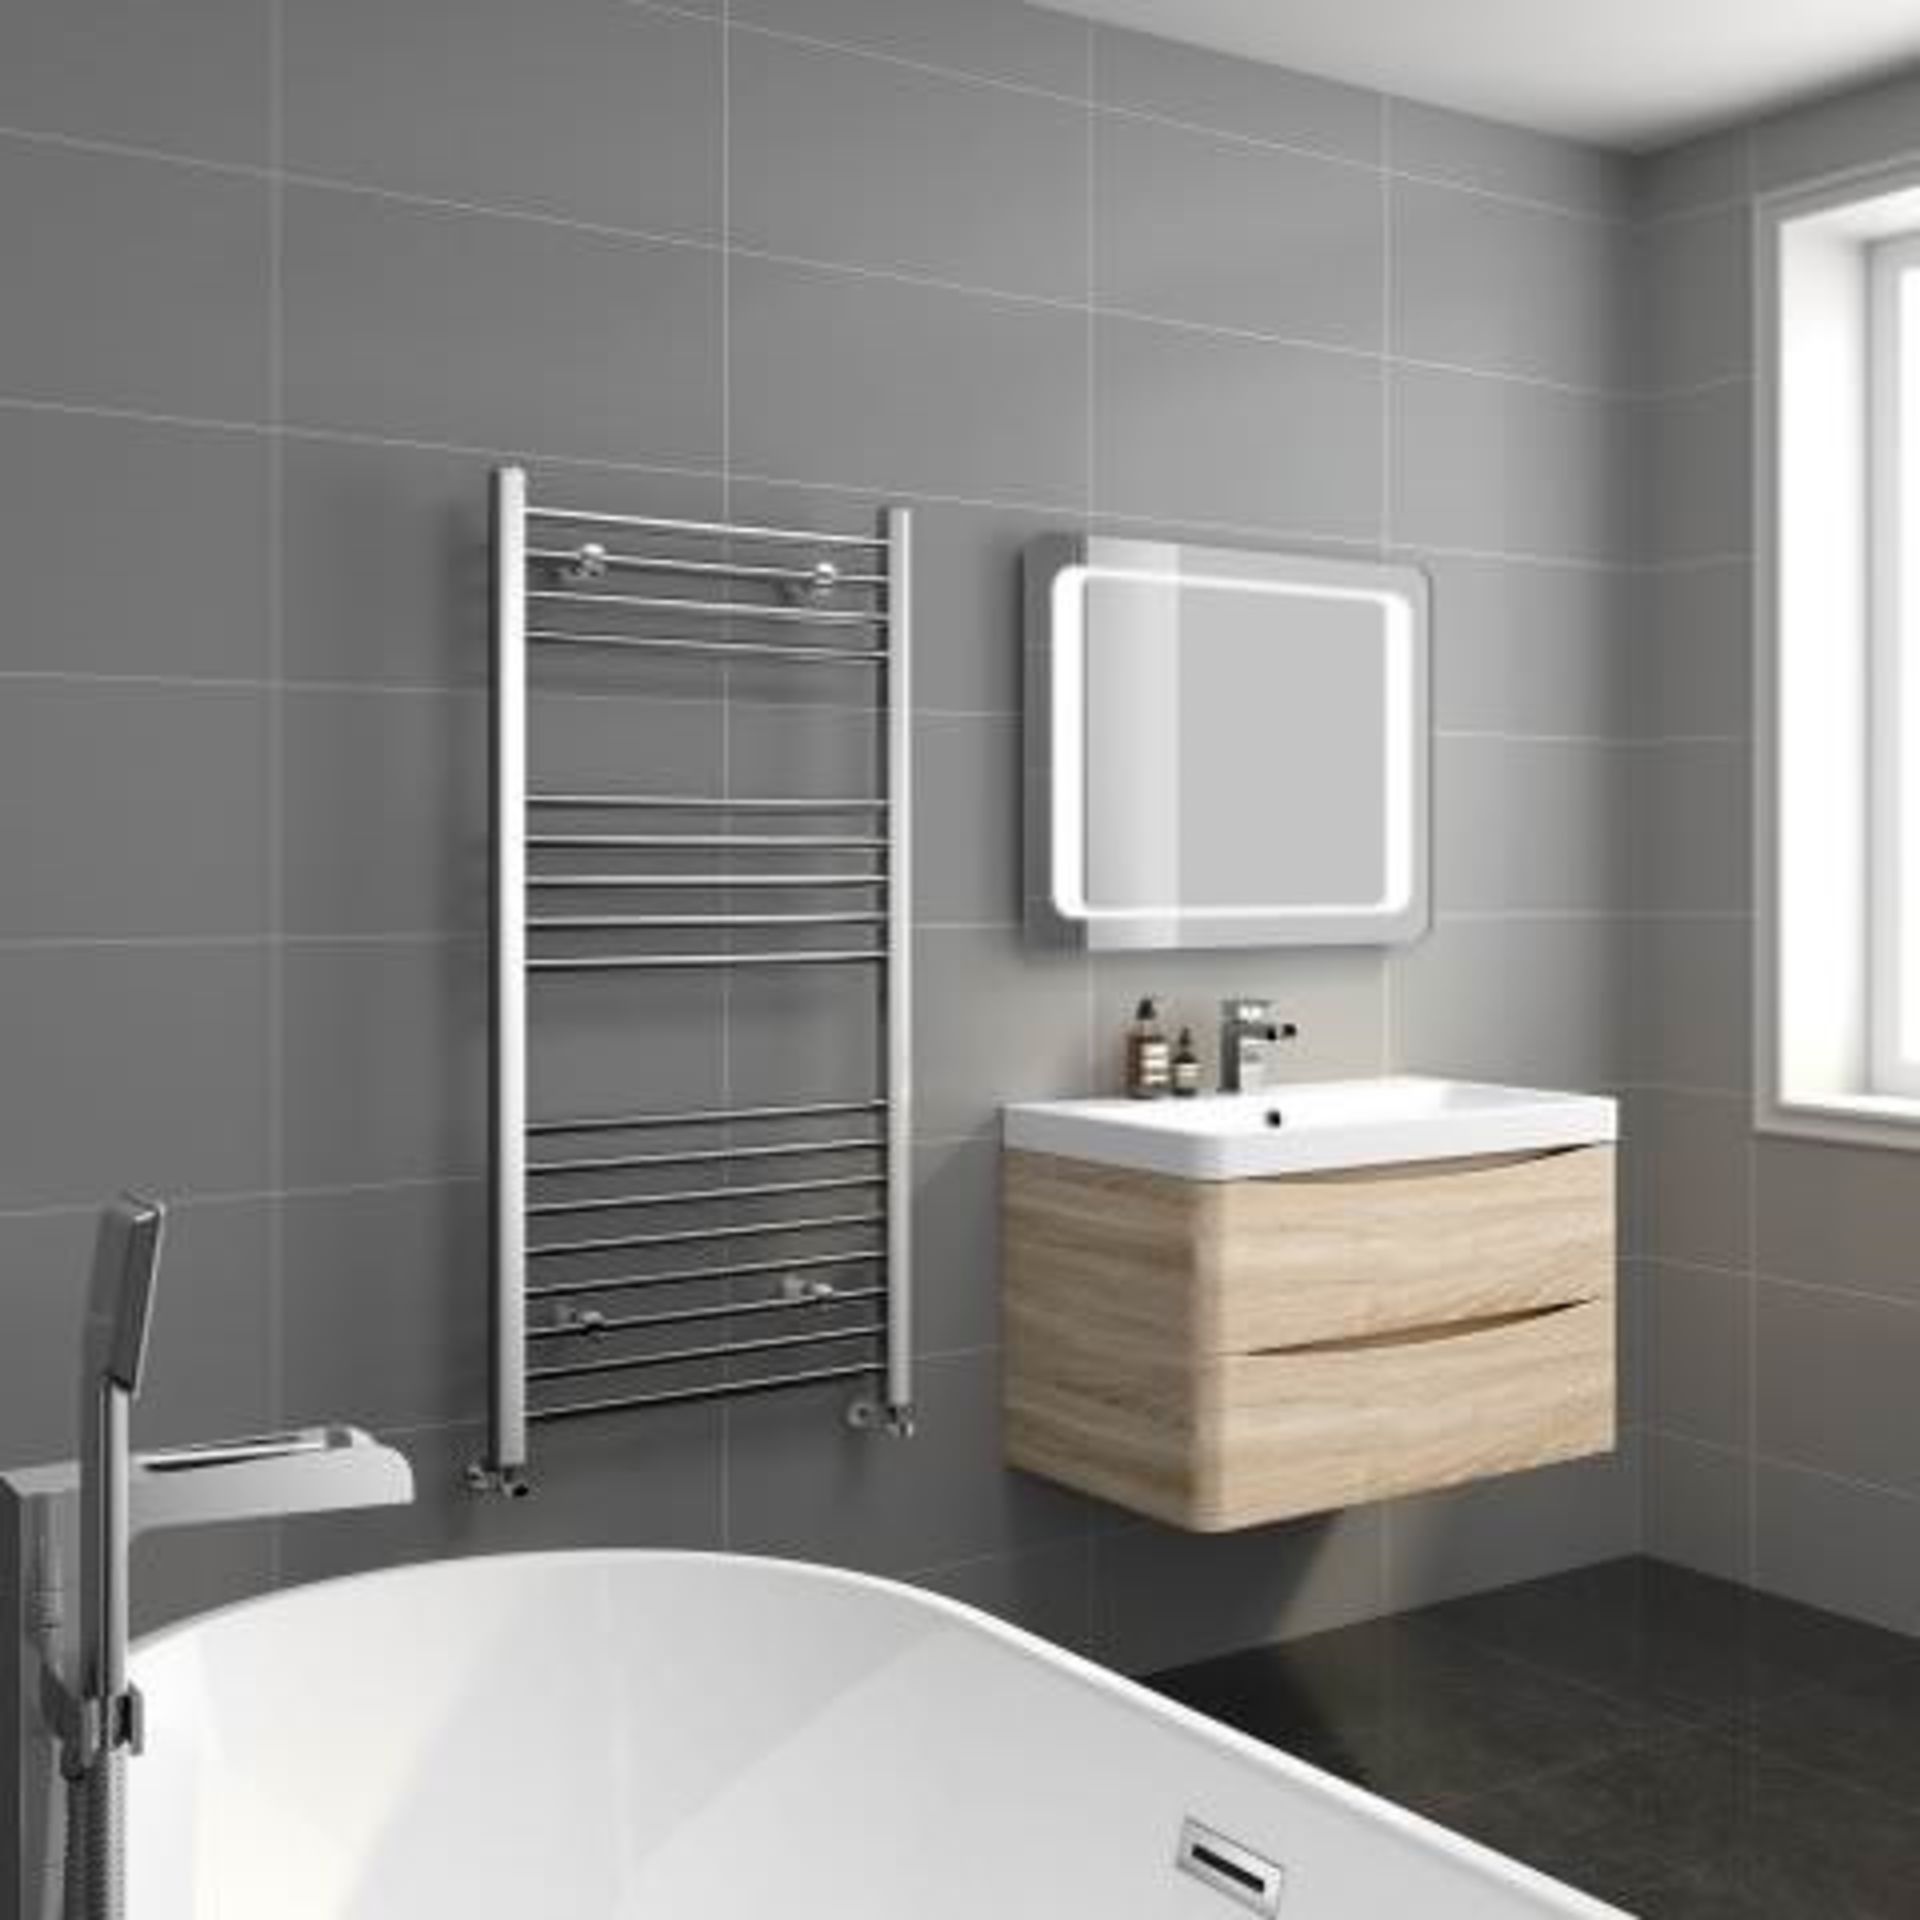 BRAND NEW BOXED 1200x600mm - 20mm Tubes - Chrome Heated Straight Rail Ladder Towel Radiator.RRP £ - Image 4 of 4